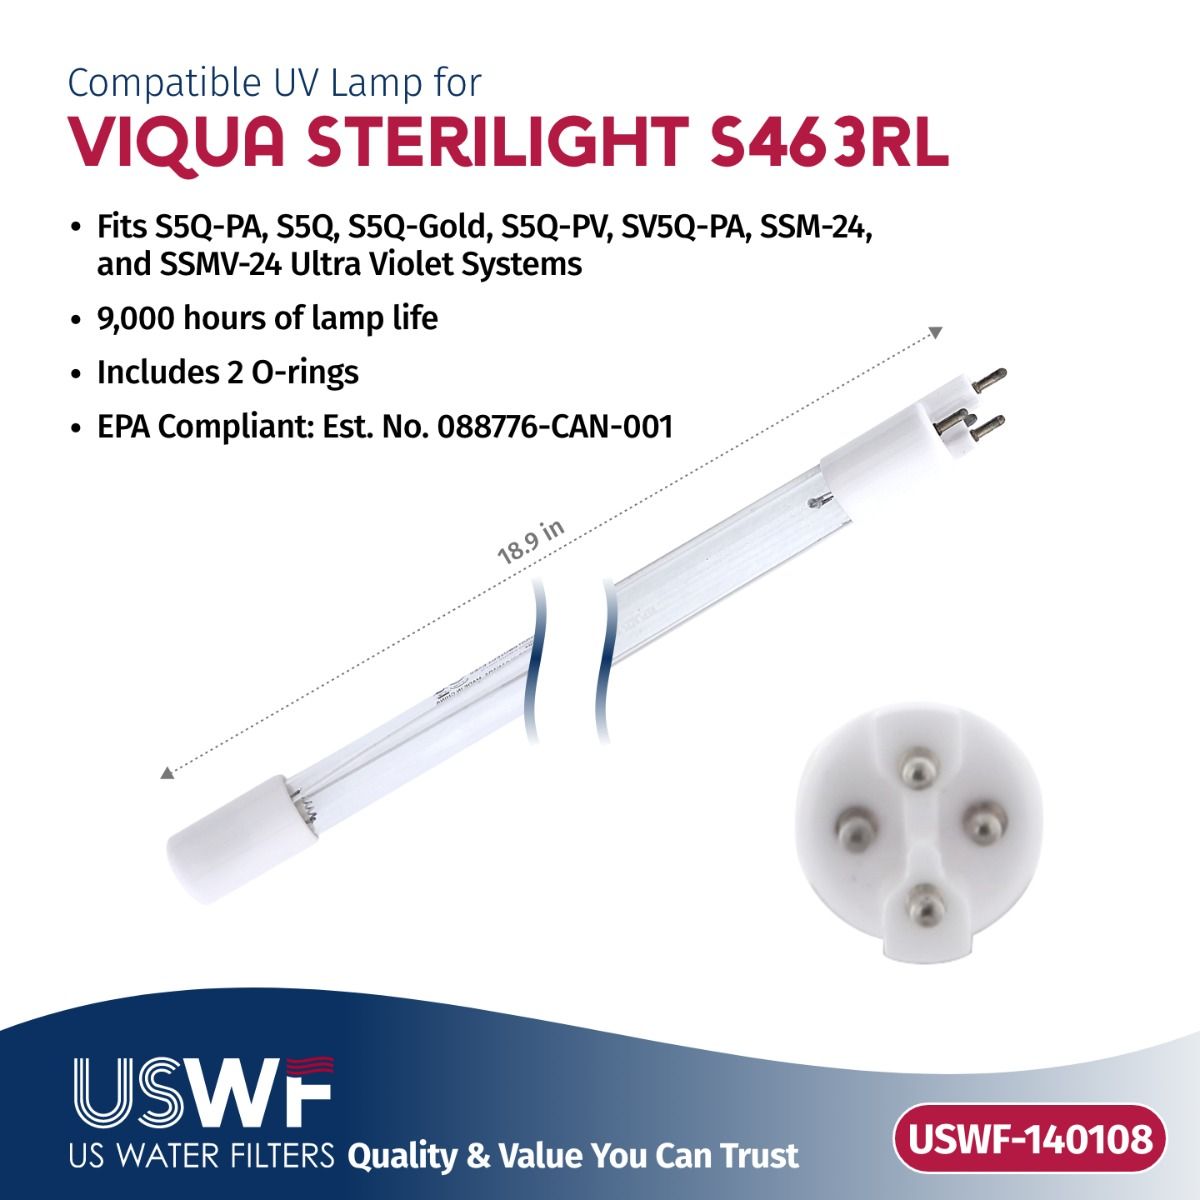 Replacement for VIQUA S463-QL UV Lamp/Sleeve Combo by USWF | Fits the VIQUA S5Q, SV5Q-PA, & SSM-24 Series UV Systems